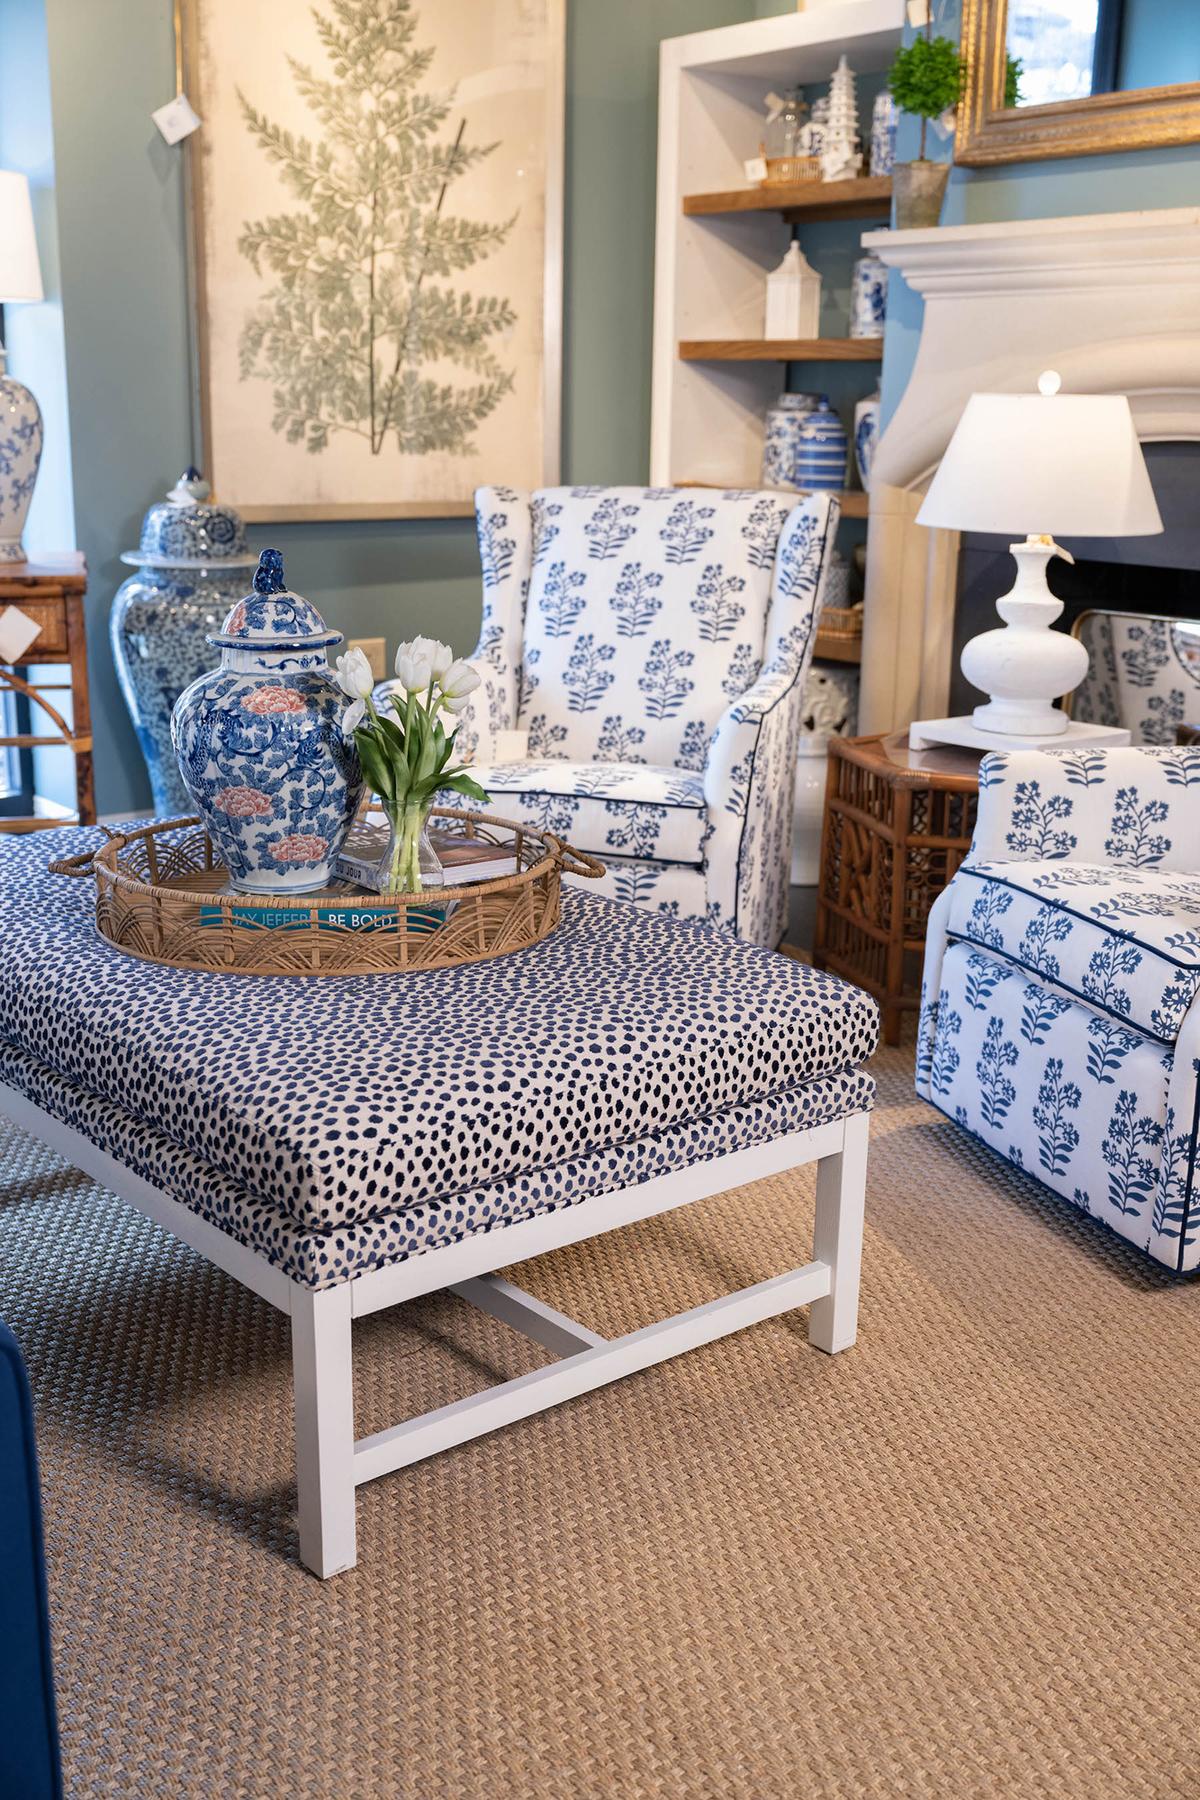 Ottomans are a great source of texture in a room, like this blue and white speckled design. (Handout/TNS)